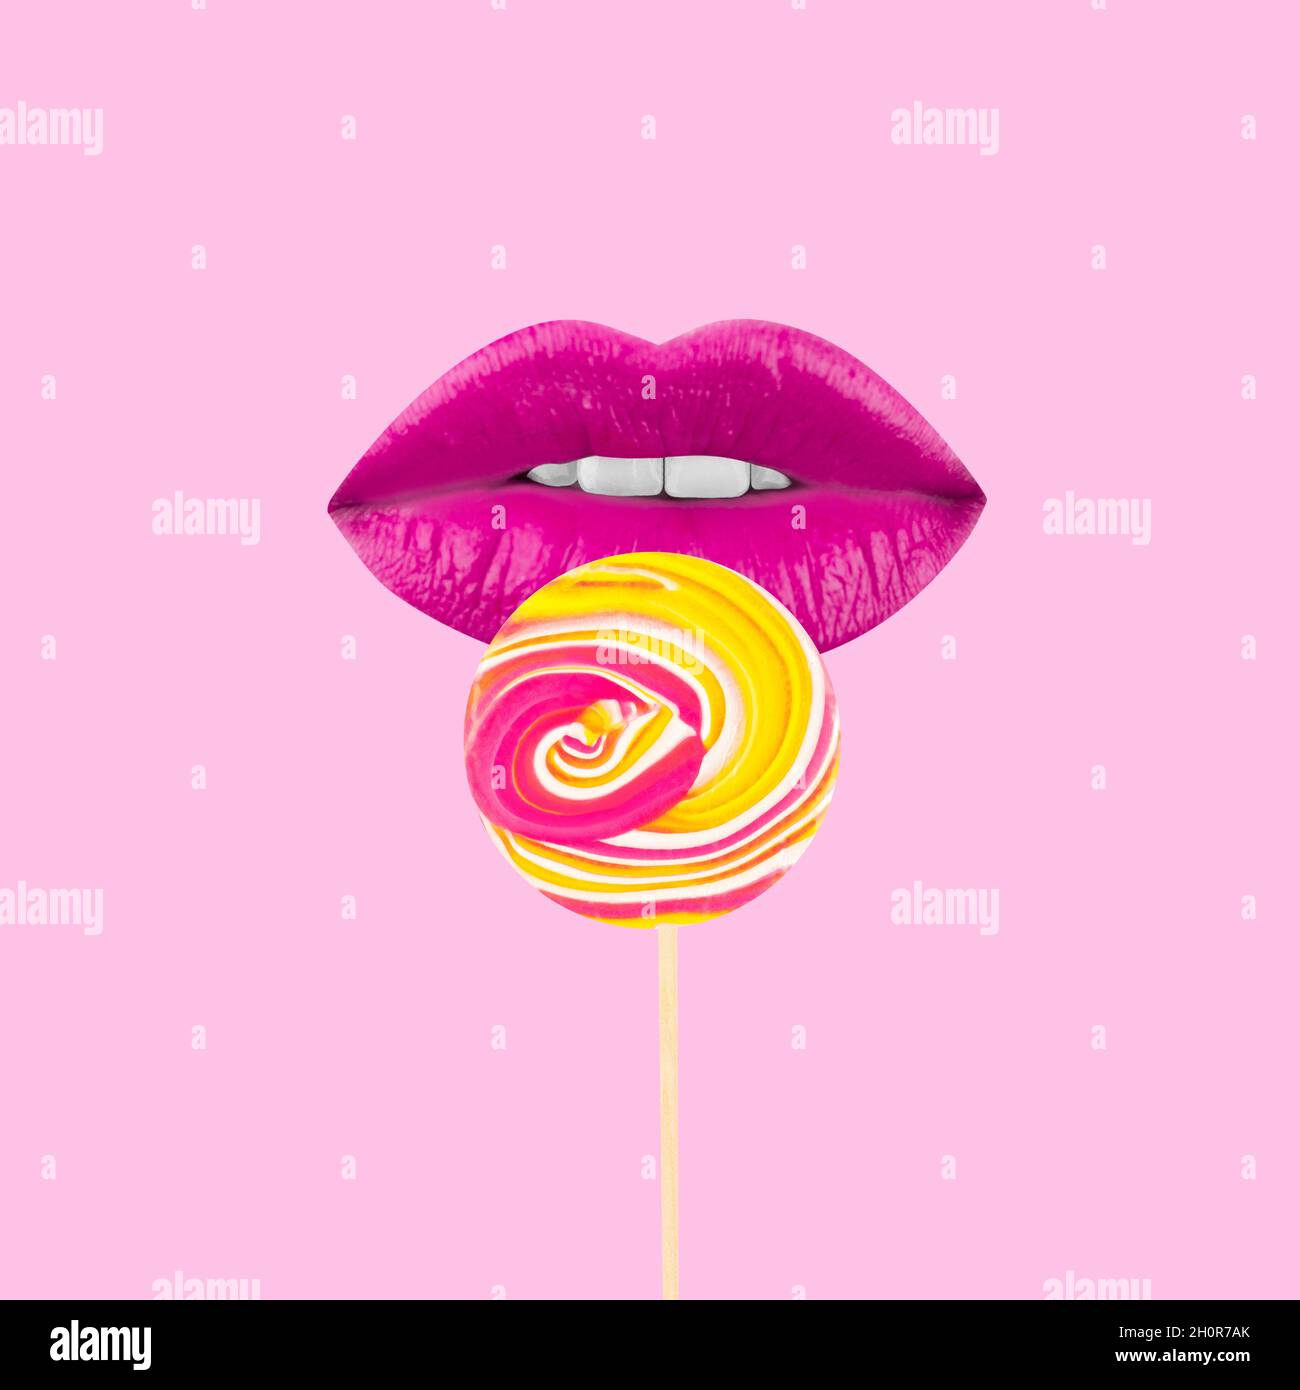 Colored Lollipop with pink lips оn a light pink background. Summer art collage. Valentine's background. Stock Photo